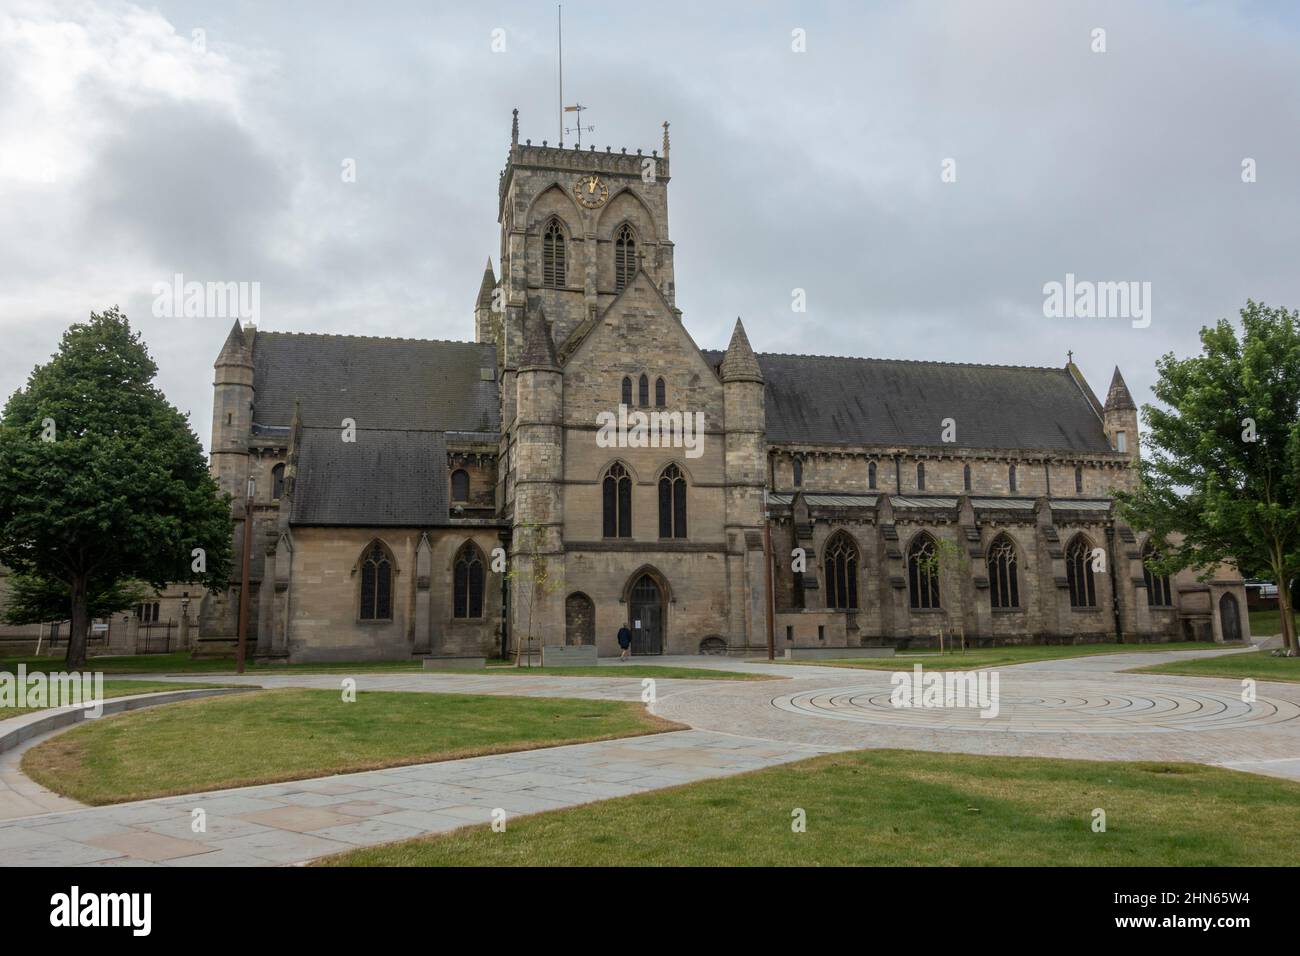 Grimsby Minster, Grimsby, North East Lincolnshire, UK. Stock Photo